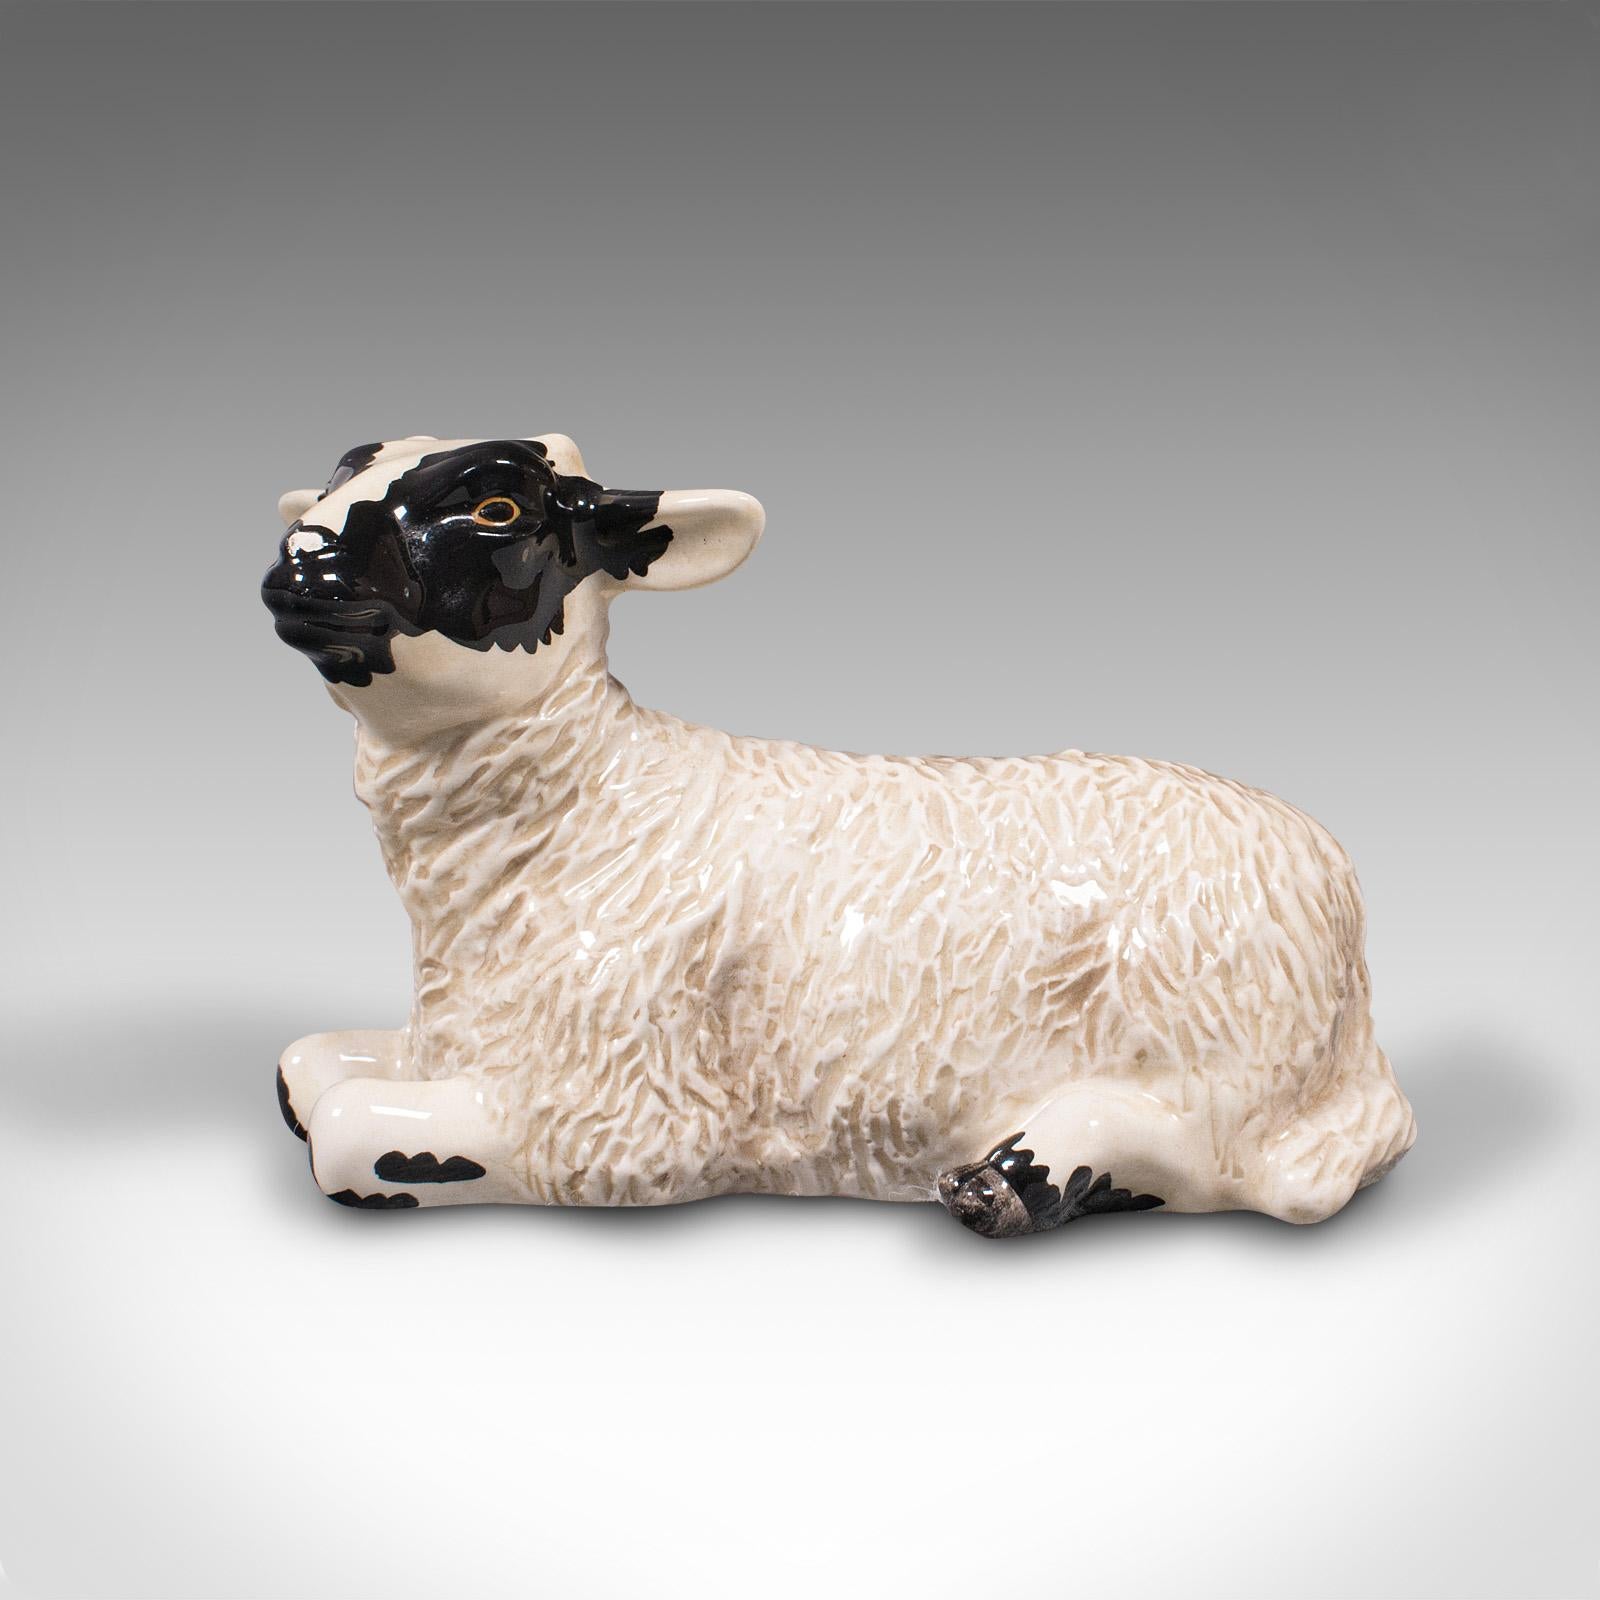 This is a small vintage decorative lamb. An English, ceramic livestock figure by Beswick, dating to the late 20th century, circa 1990.

Delightfully petite with an endearing demeanour
Displays a desirable aged patina and in good order
Pleasingly